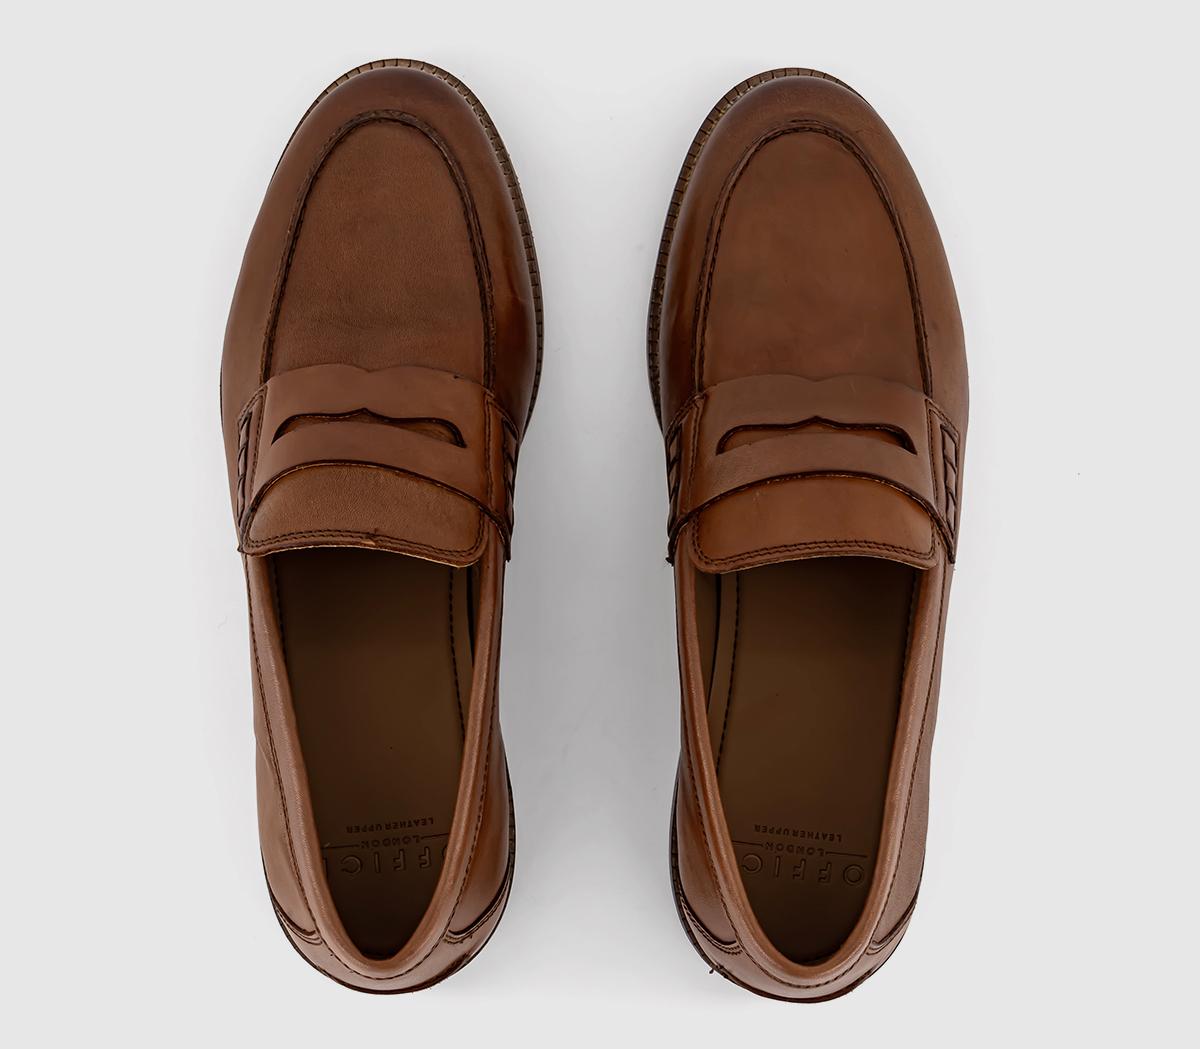 OFFICE Marlborough Penny Loafers Tan Leather - Men’s Smart Shoes